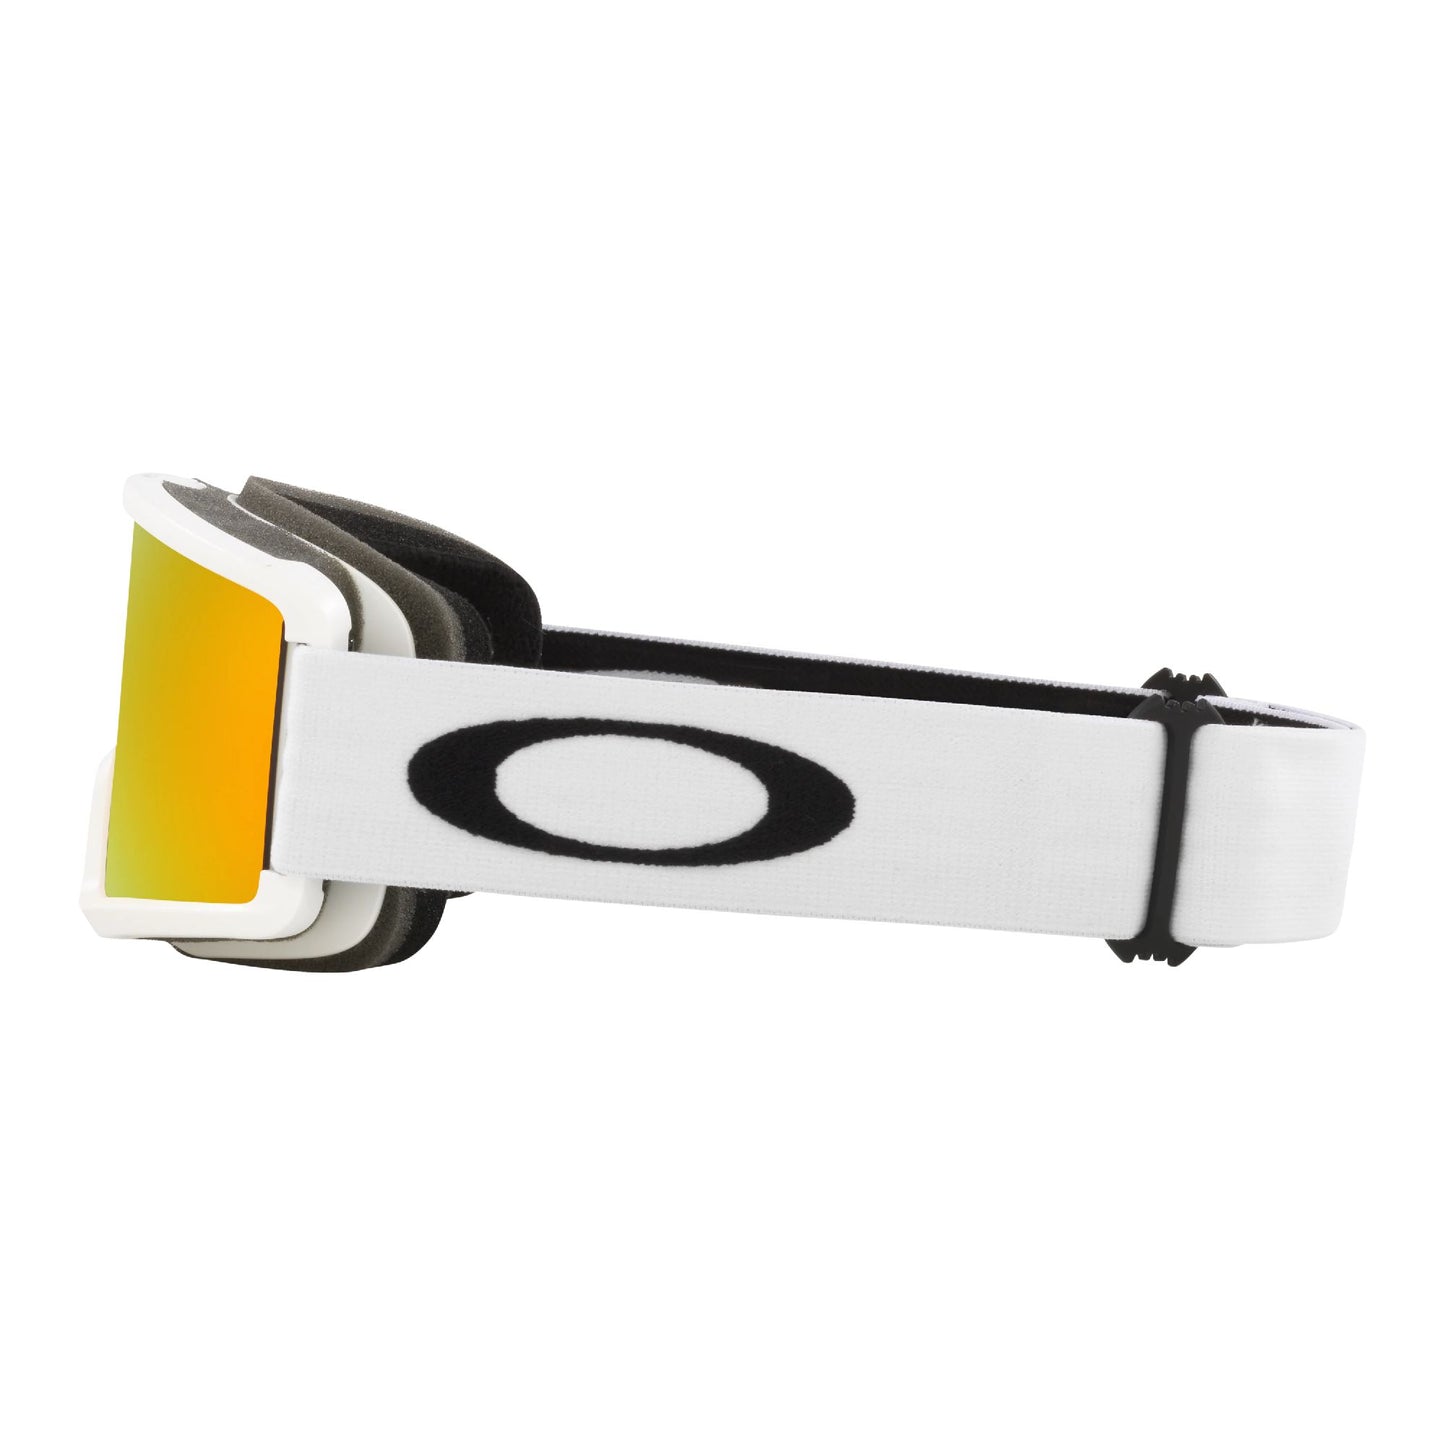 Oakley Youth Target Line S Snow Goggles Matte White Fire Iridium Snow Goggles